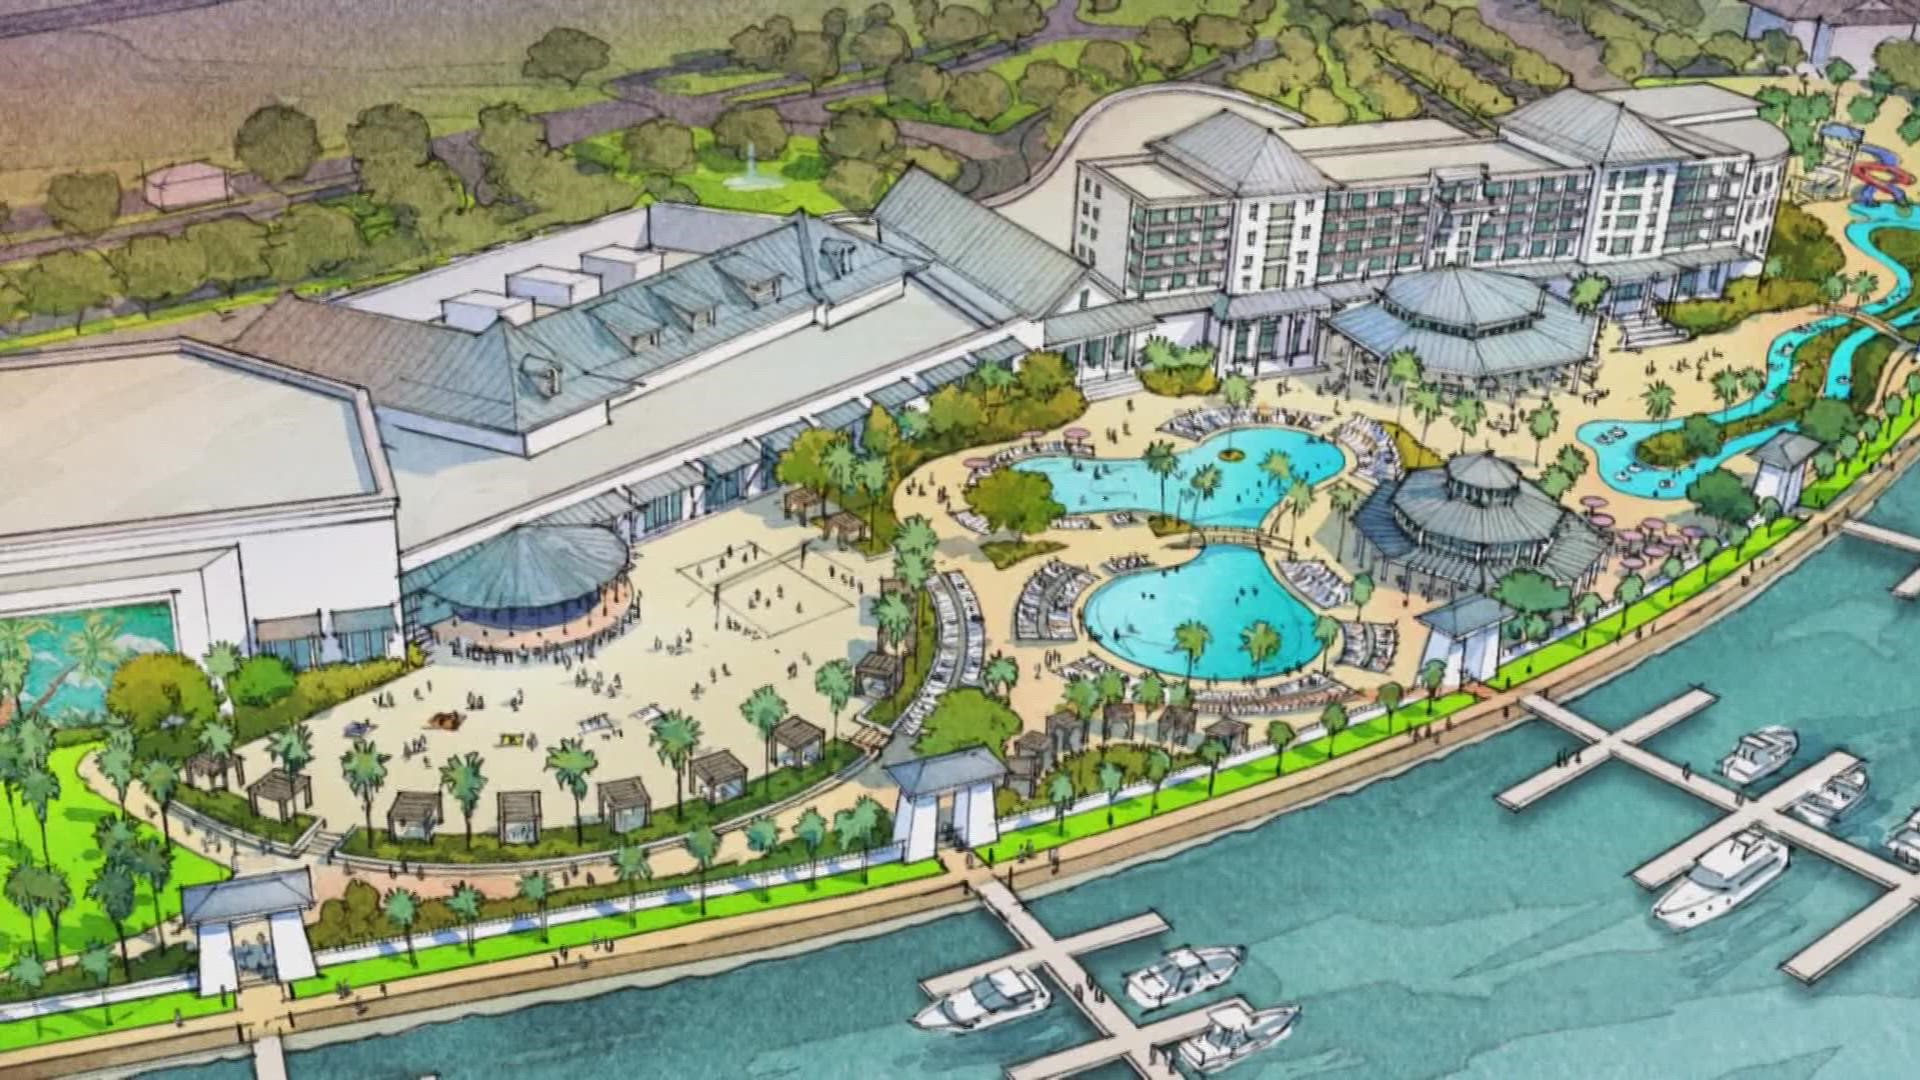 Slidell officials are putting a stop to rumors surrounding the upcoming casino vote.